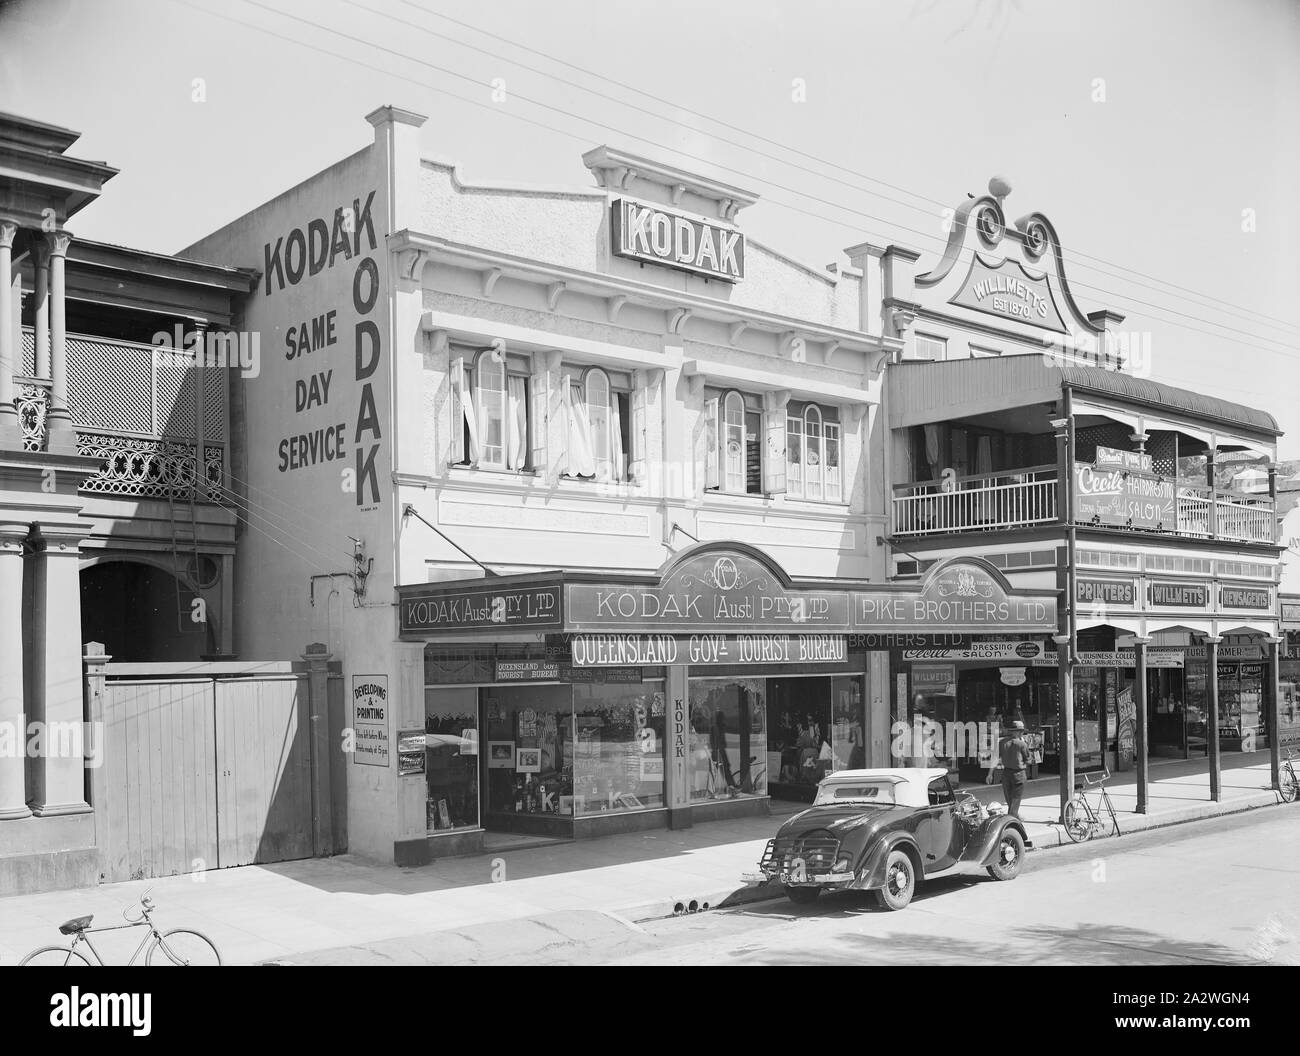 Negative, Shop Exterior Kodak Branch, Townsville, QLD, 1930s, Black and white film negative of the Kodak Australasia Pty Ltd branch store and same day processing laboratory on Flinders St, Townsville, Queensland, in the 1930s. This Kodak store was built in 1920, with the second story added in 1929. Upstairs was the processing lab for printing and developing, and downstairs was the retail shop. Out the back there was a dense tropical garden, shared by Kodak Stock Photo